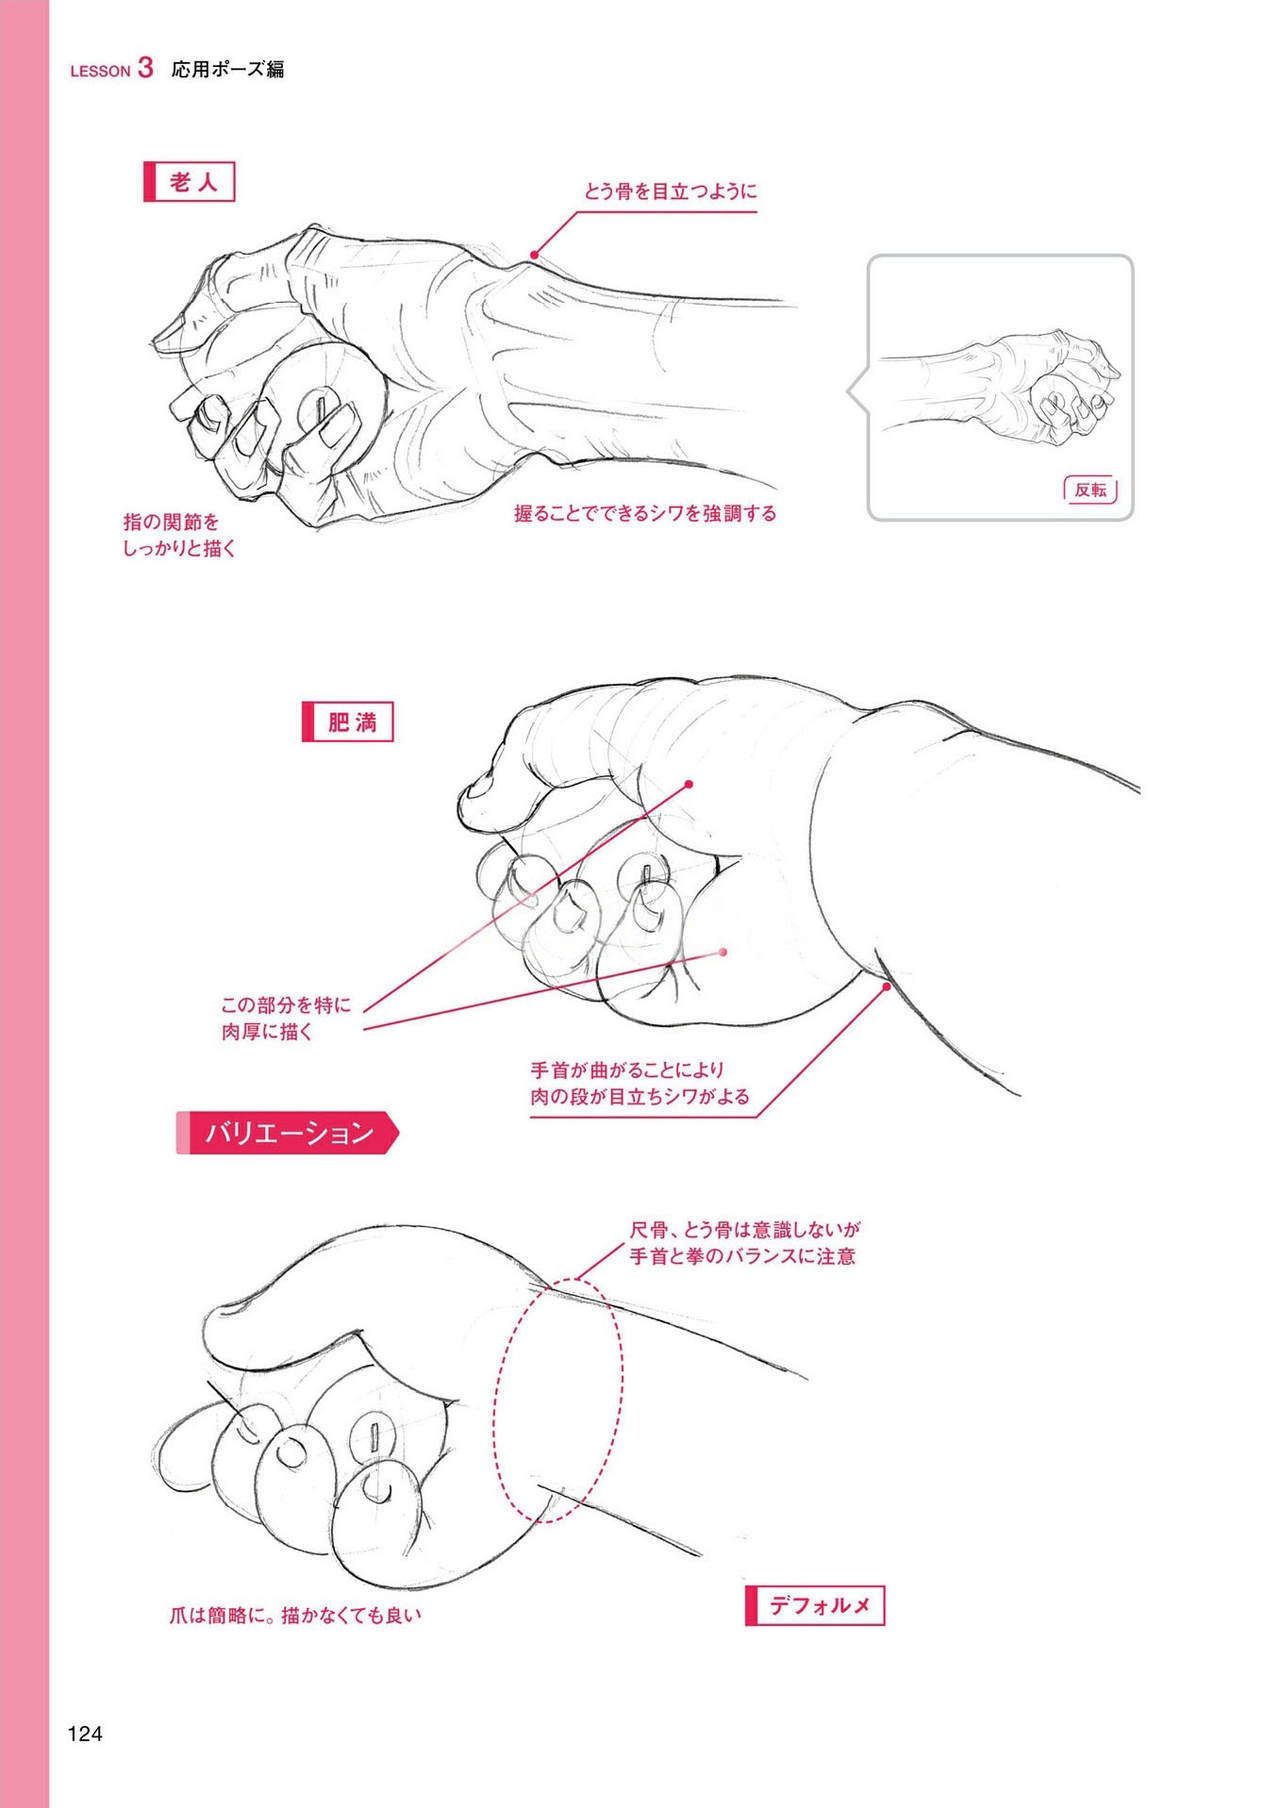 How to draw hands 124